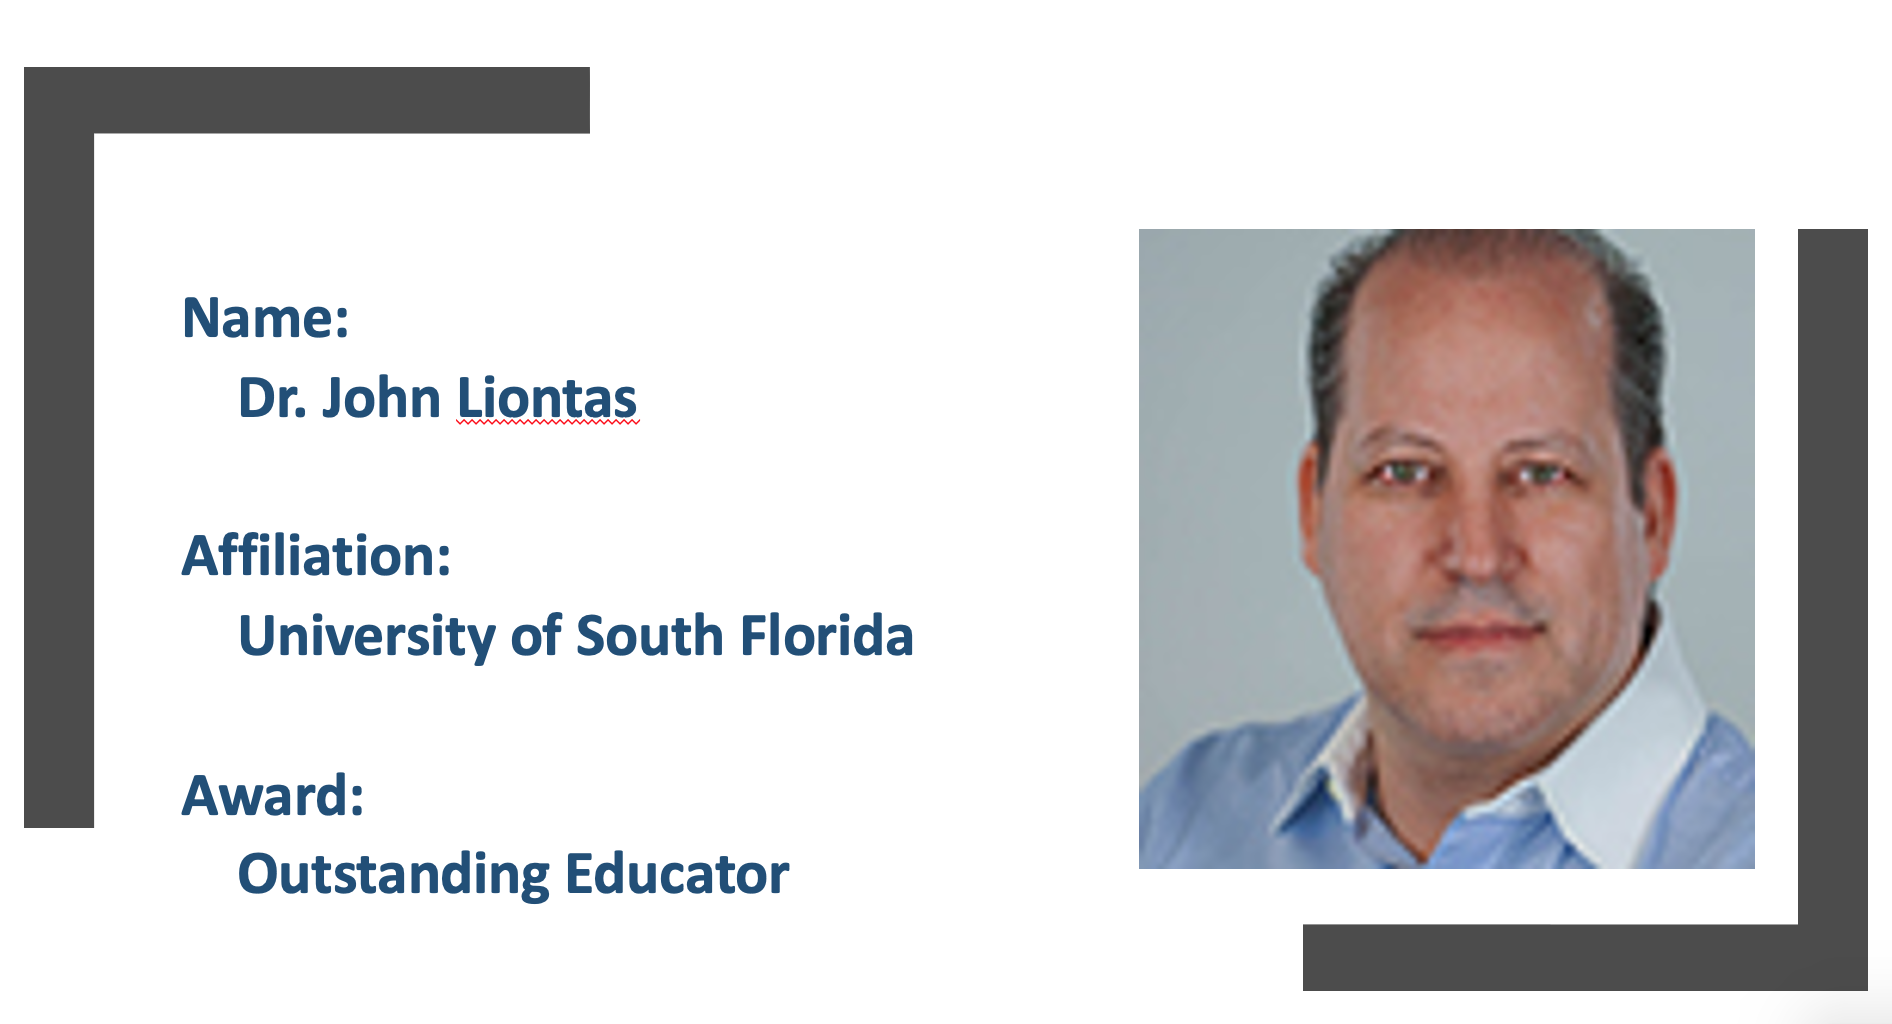 Dr. John Liontas of the University of South Florida. Awarded the Outstanding Educator Award.